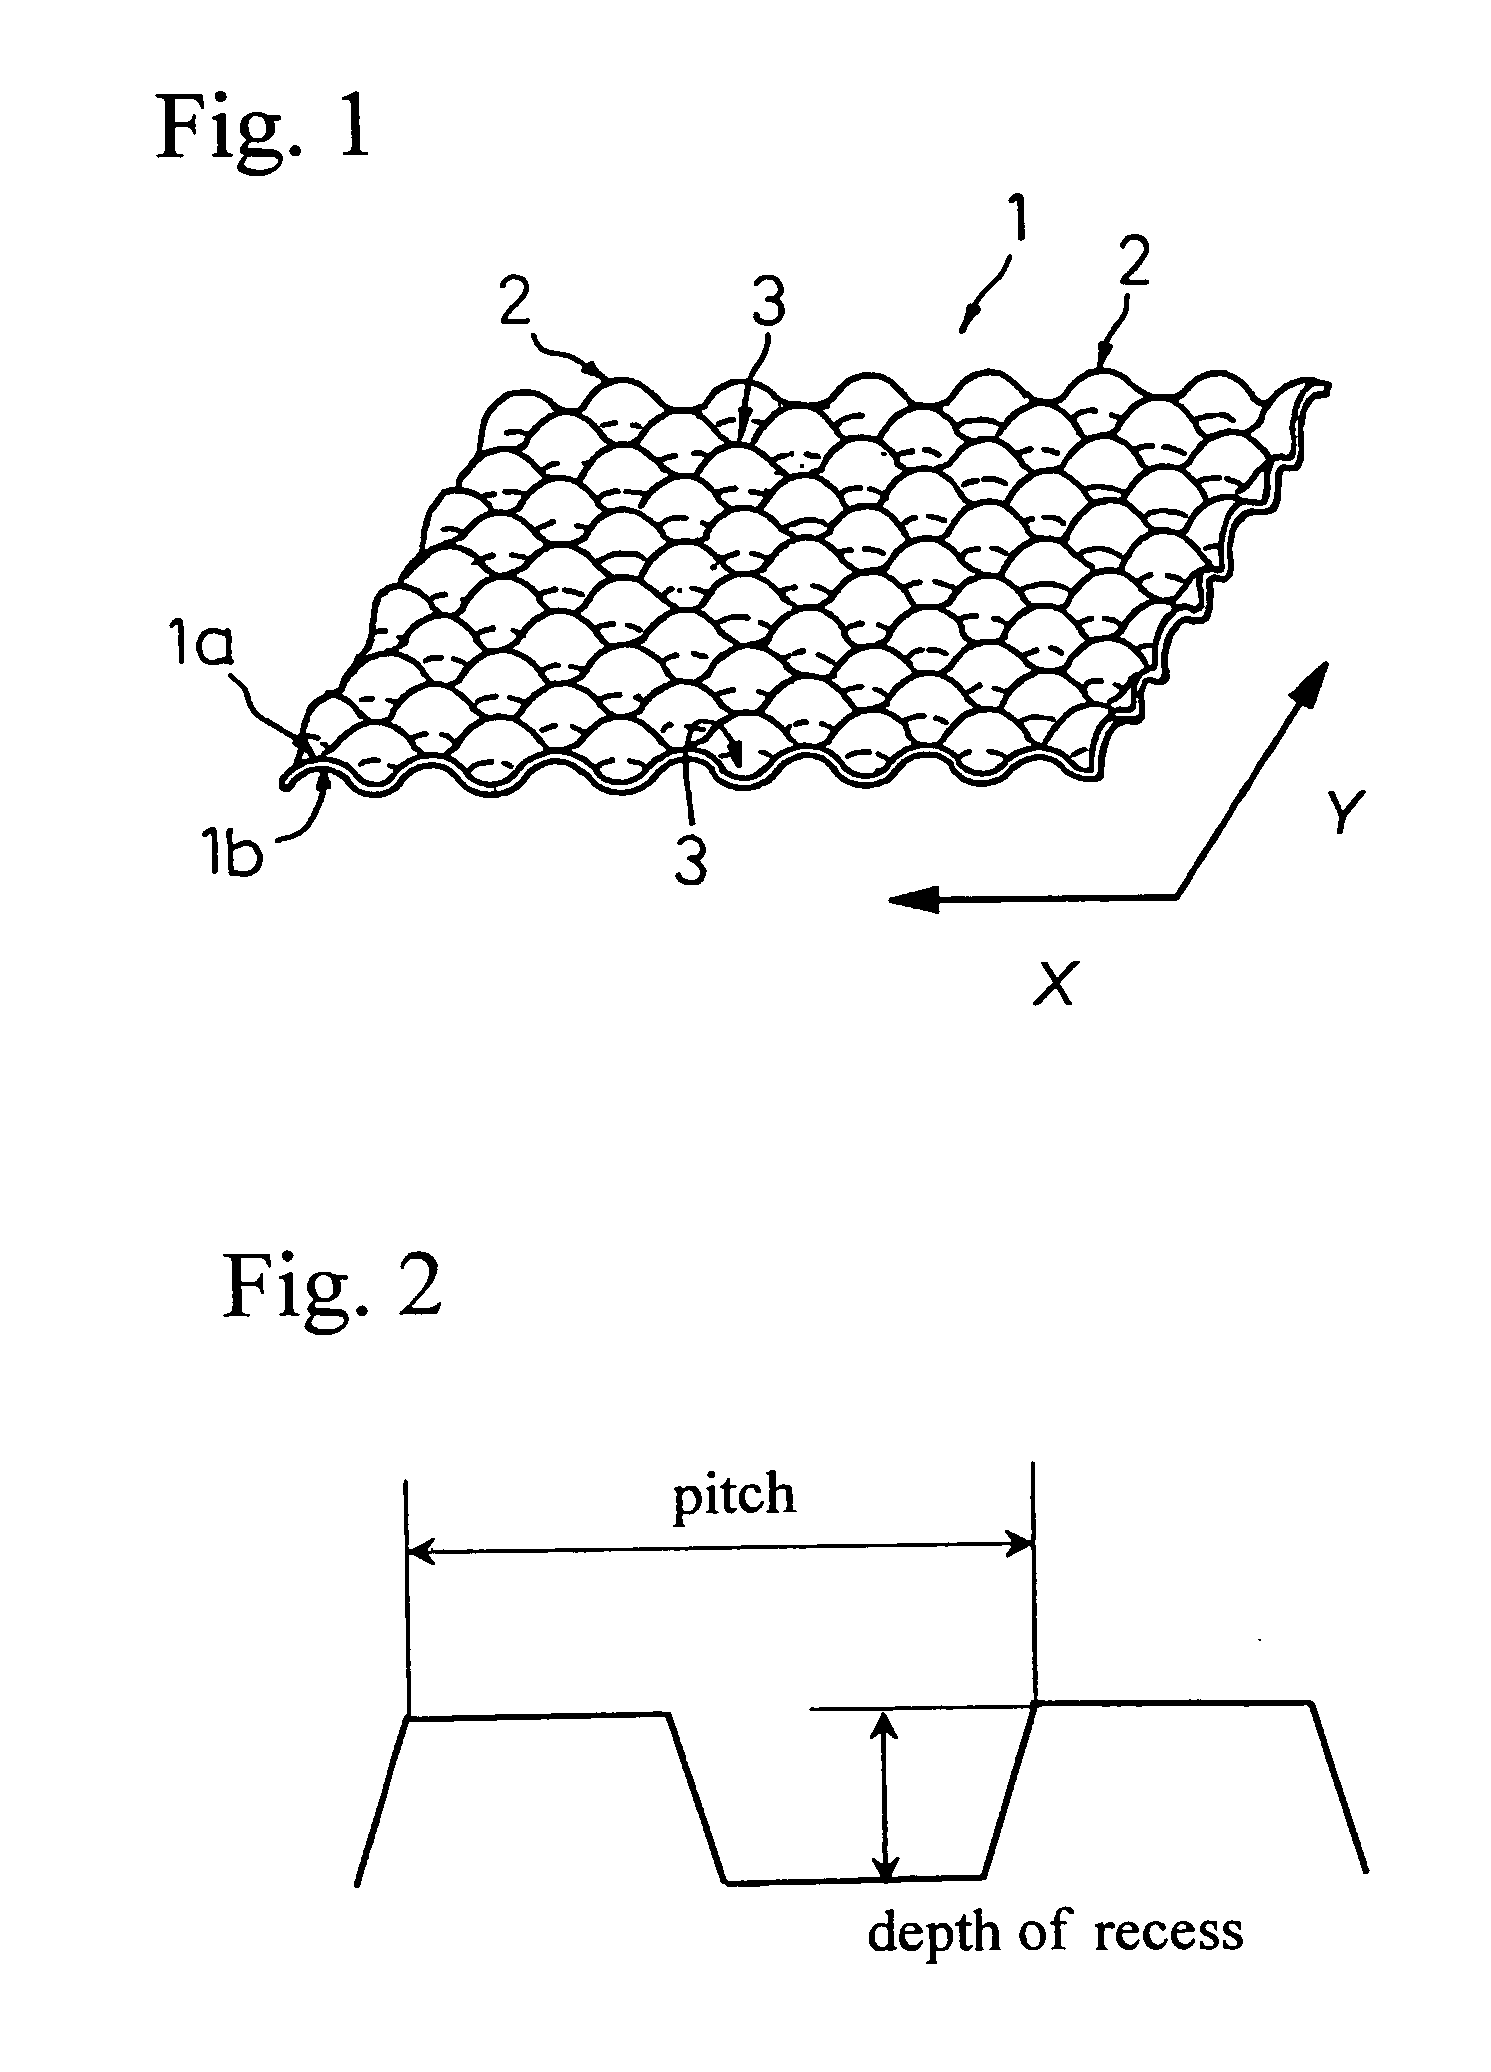 Bulky water-disintegratable cleaning article and process of producing water-disintergratable paper